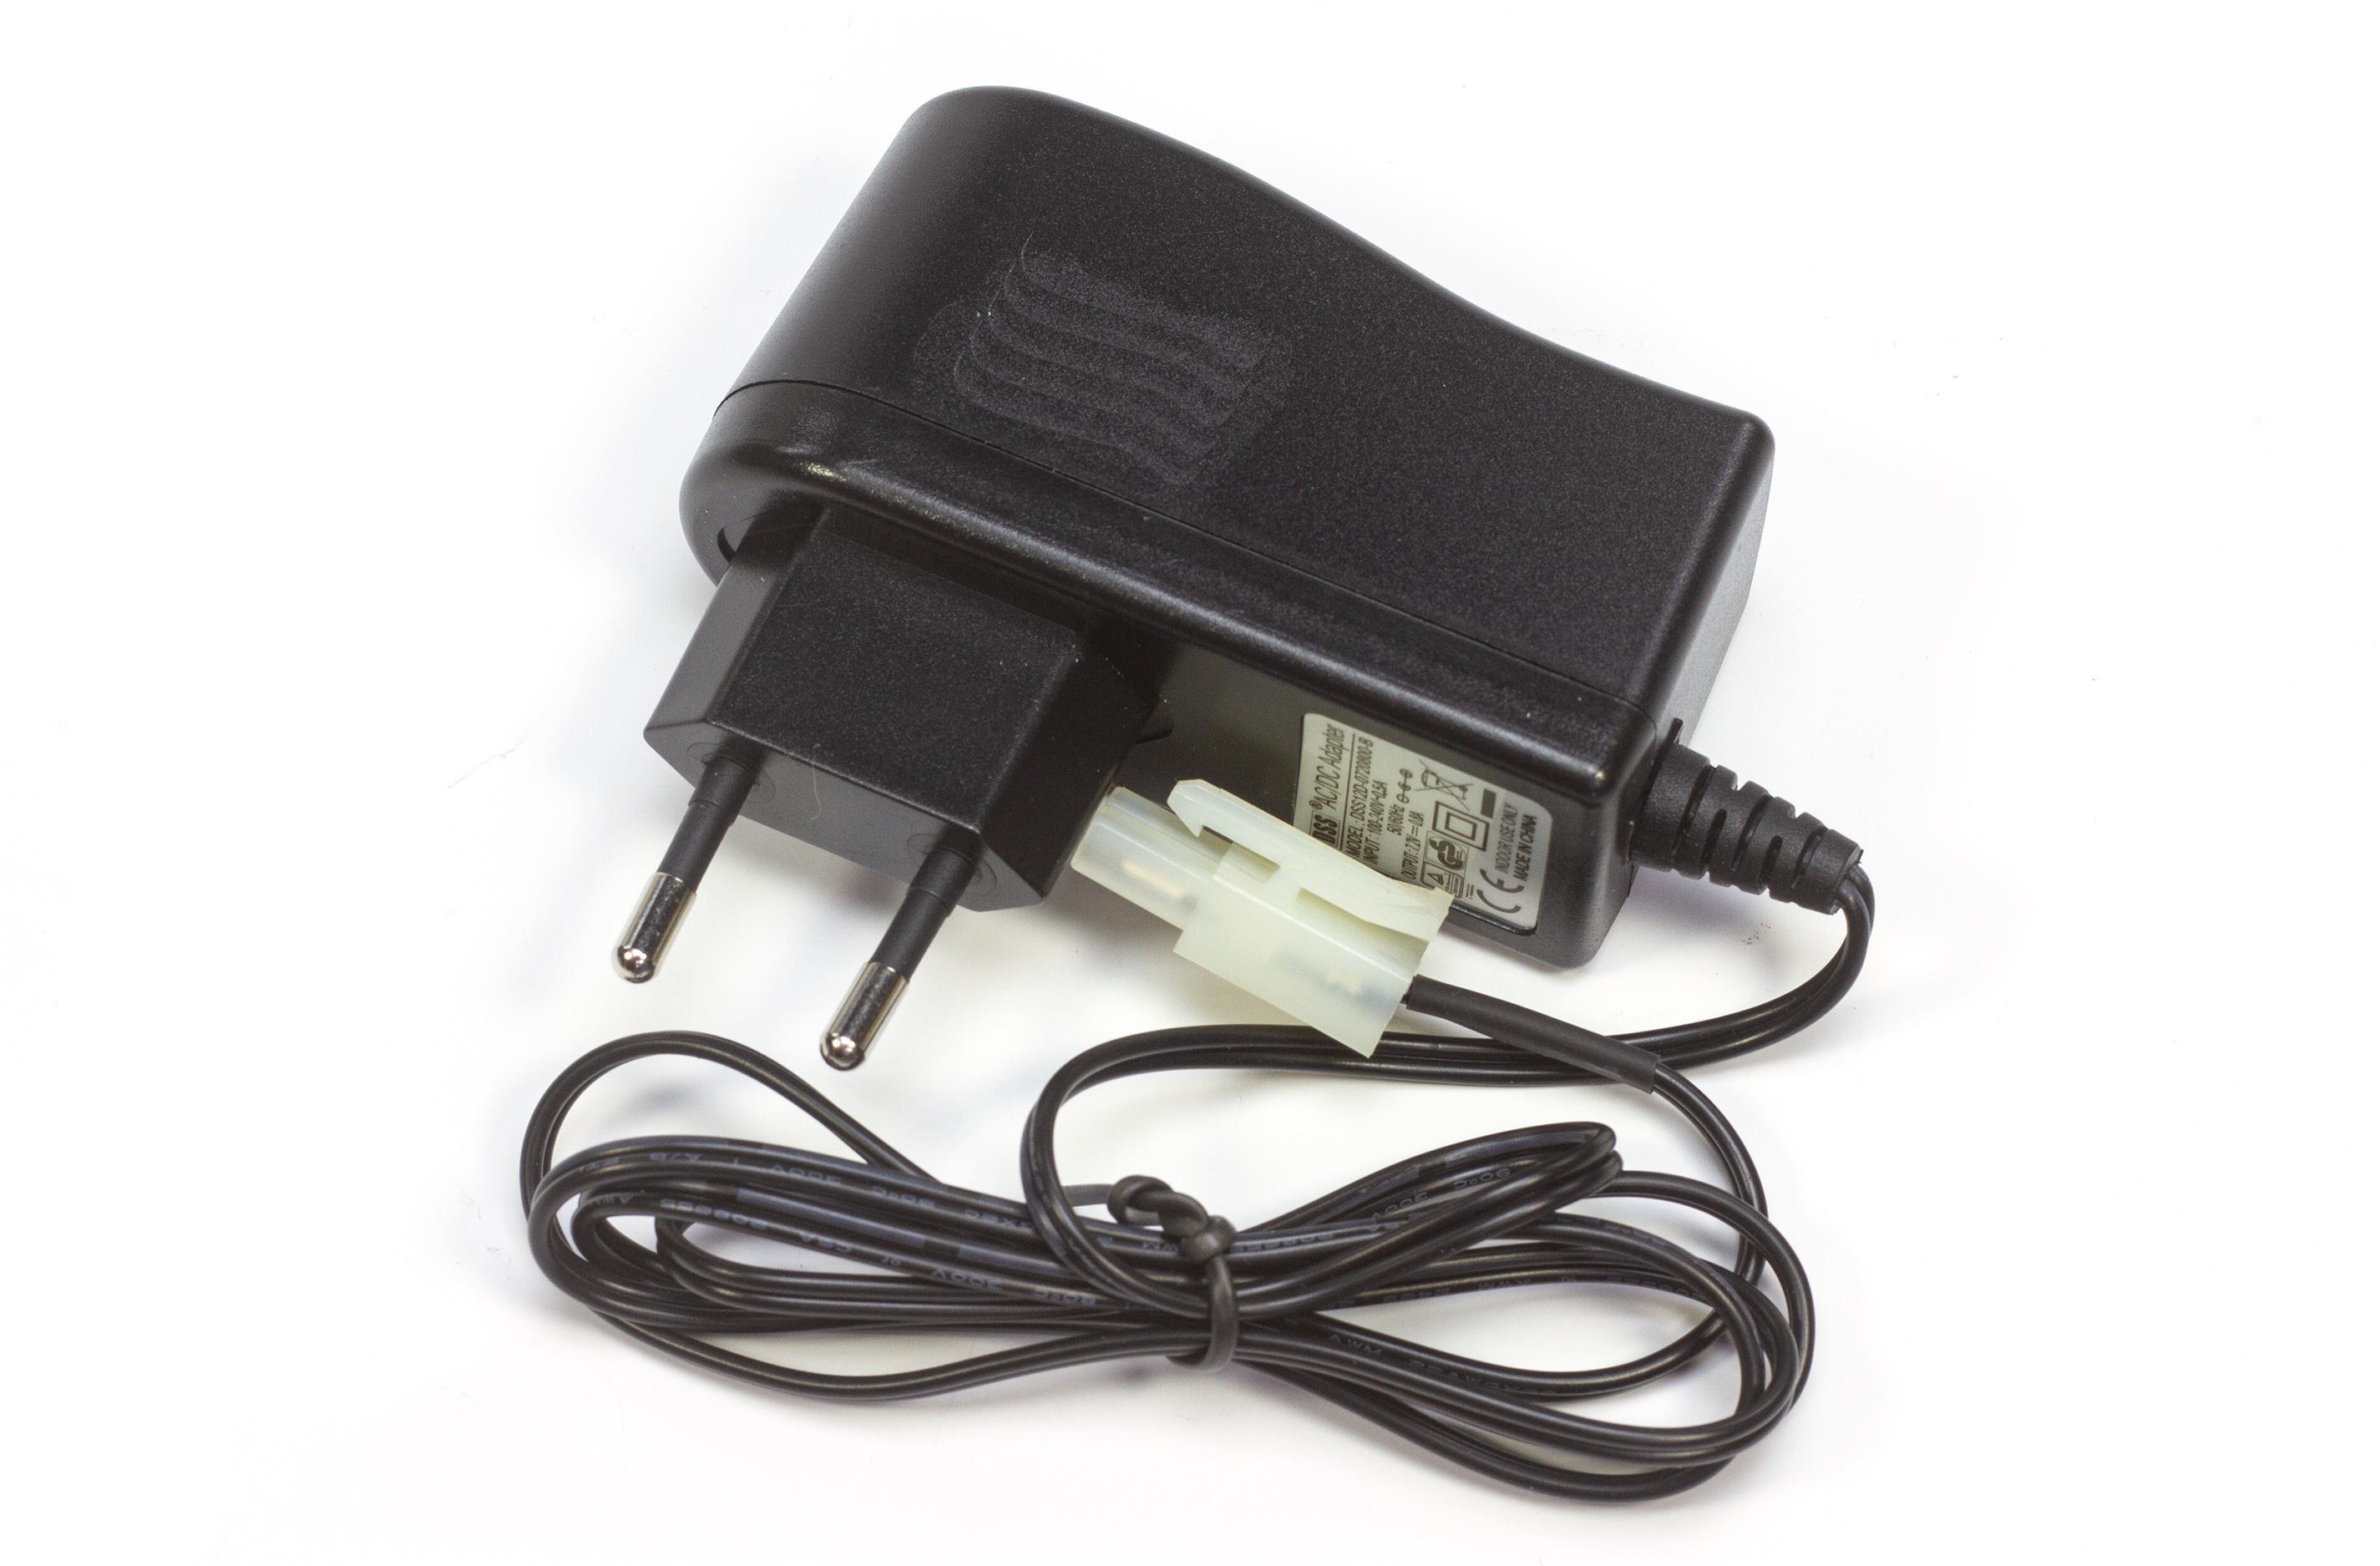 F002 Charger for HPI / Carson receiver battery